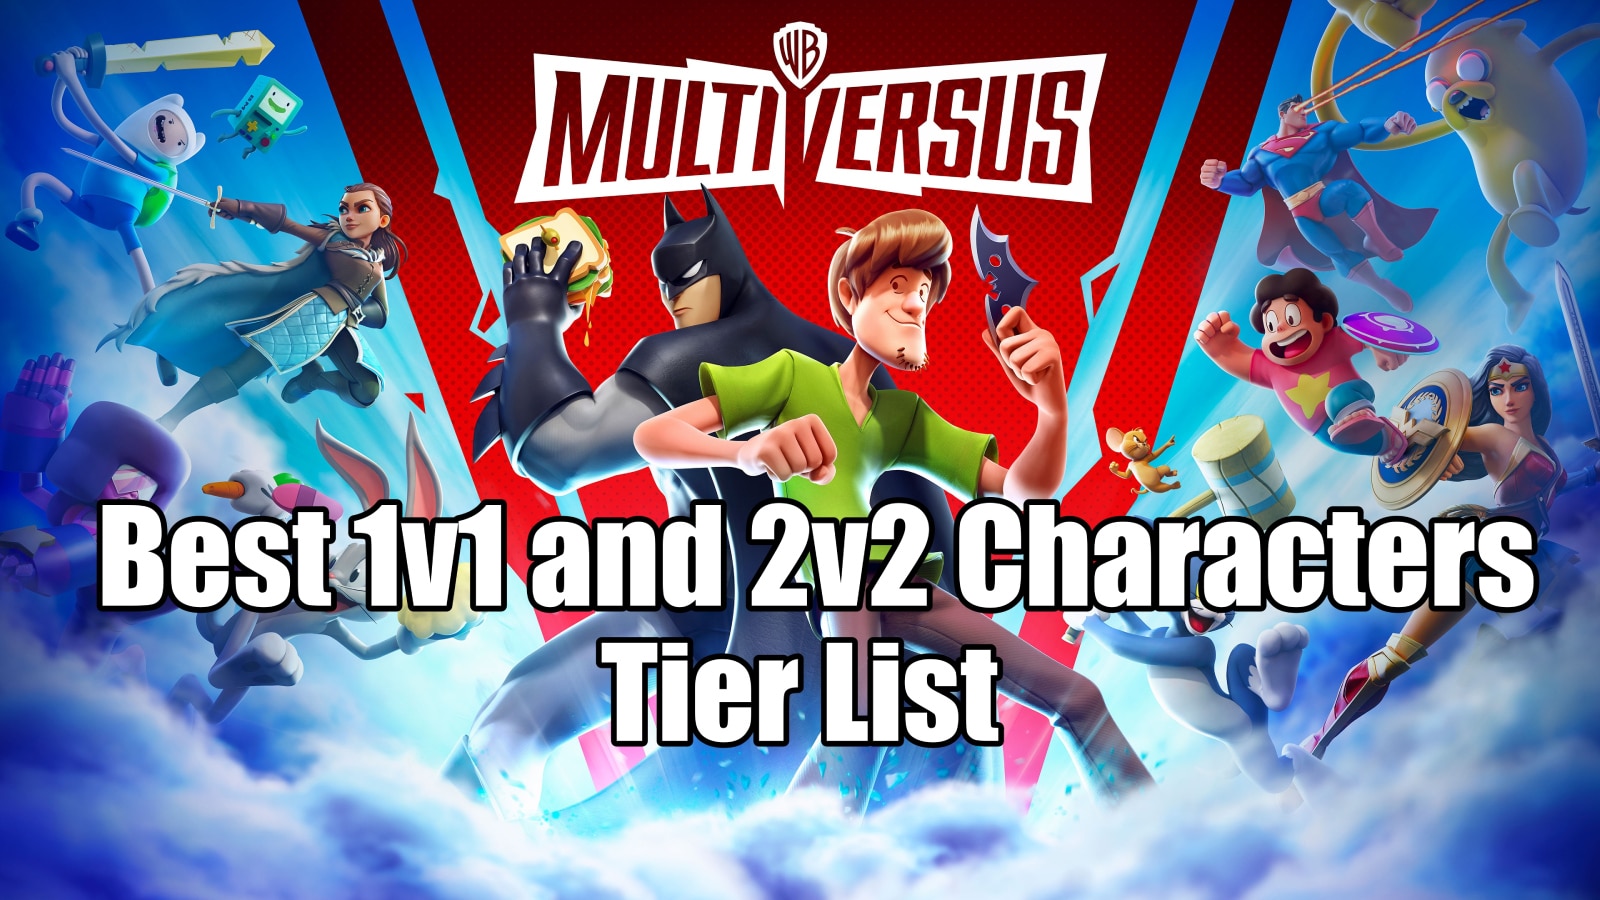 Best 1v1 and 2v2 Characters to play in Multiversus